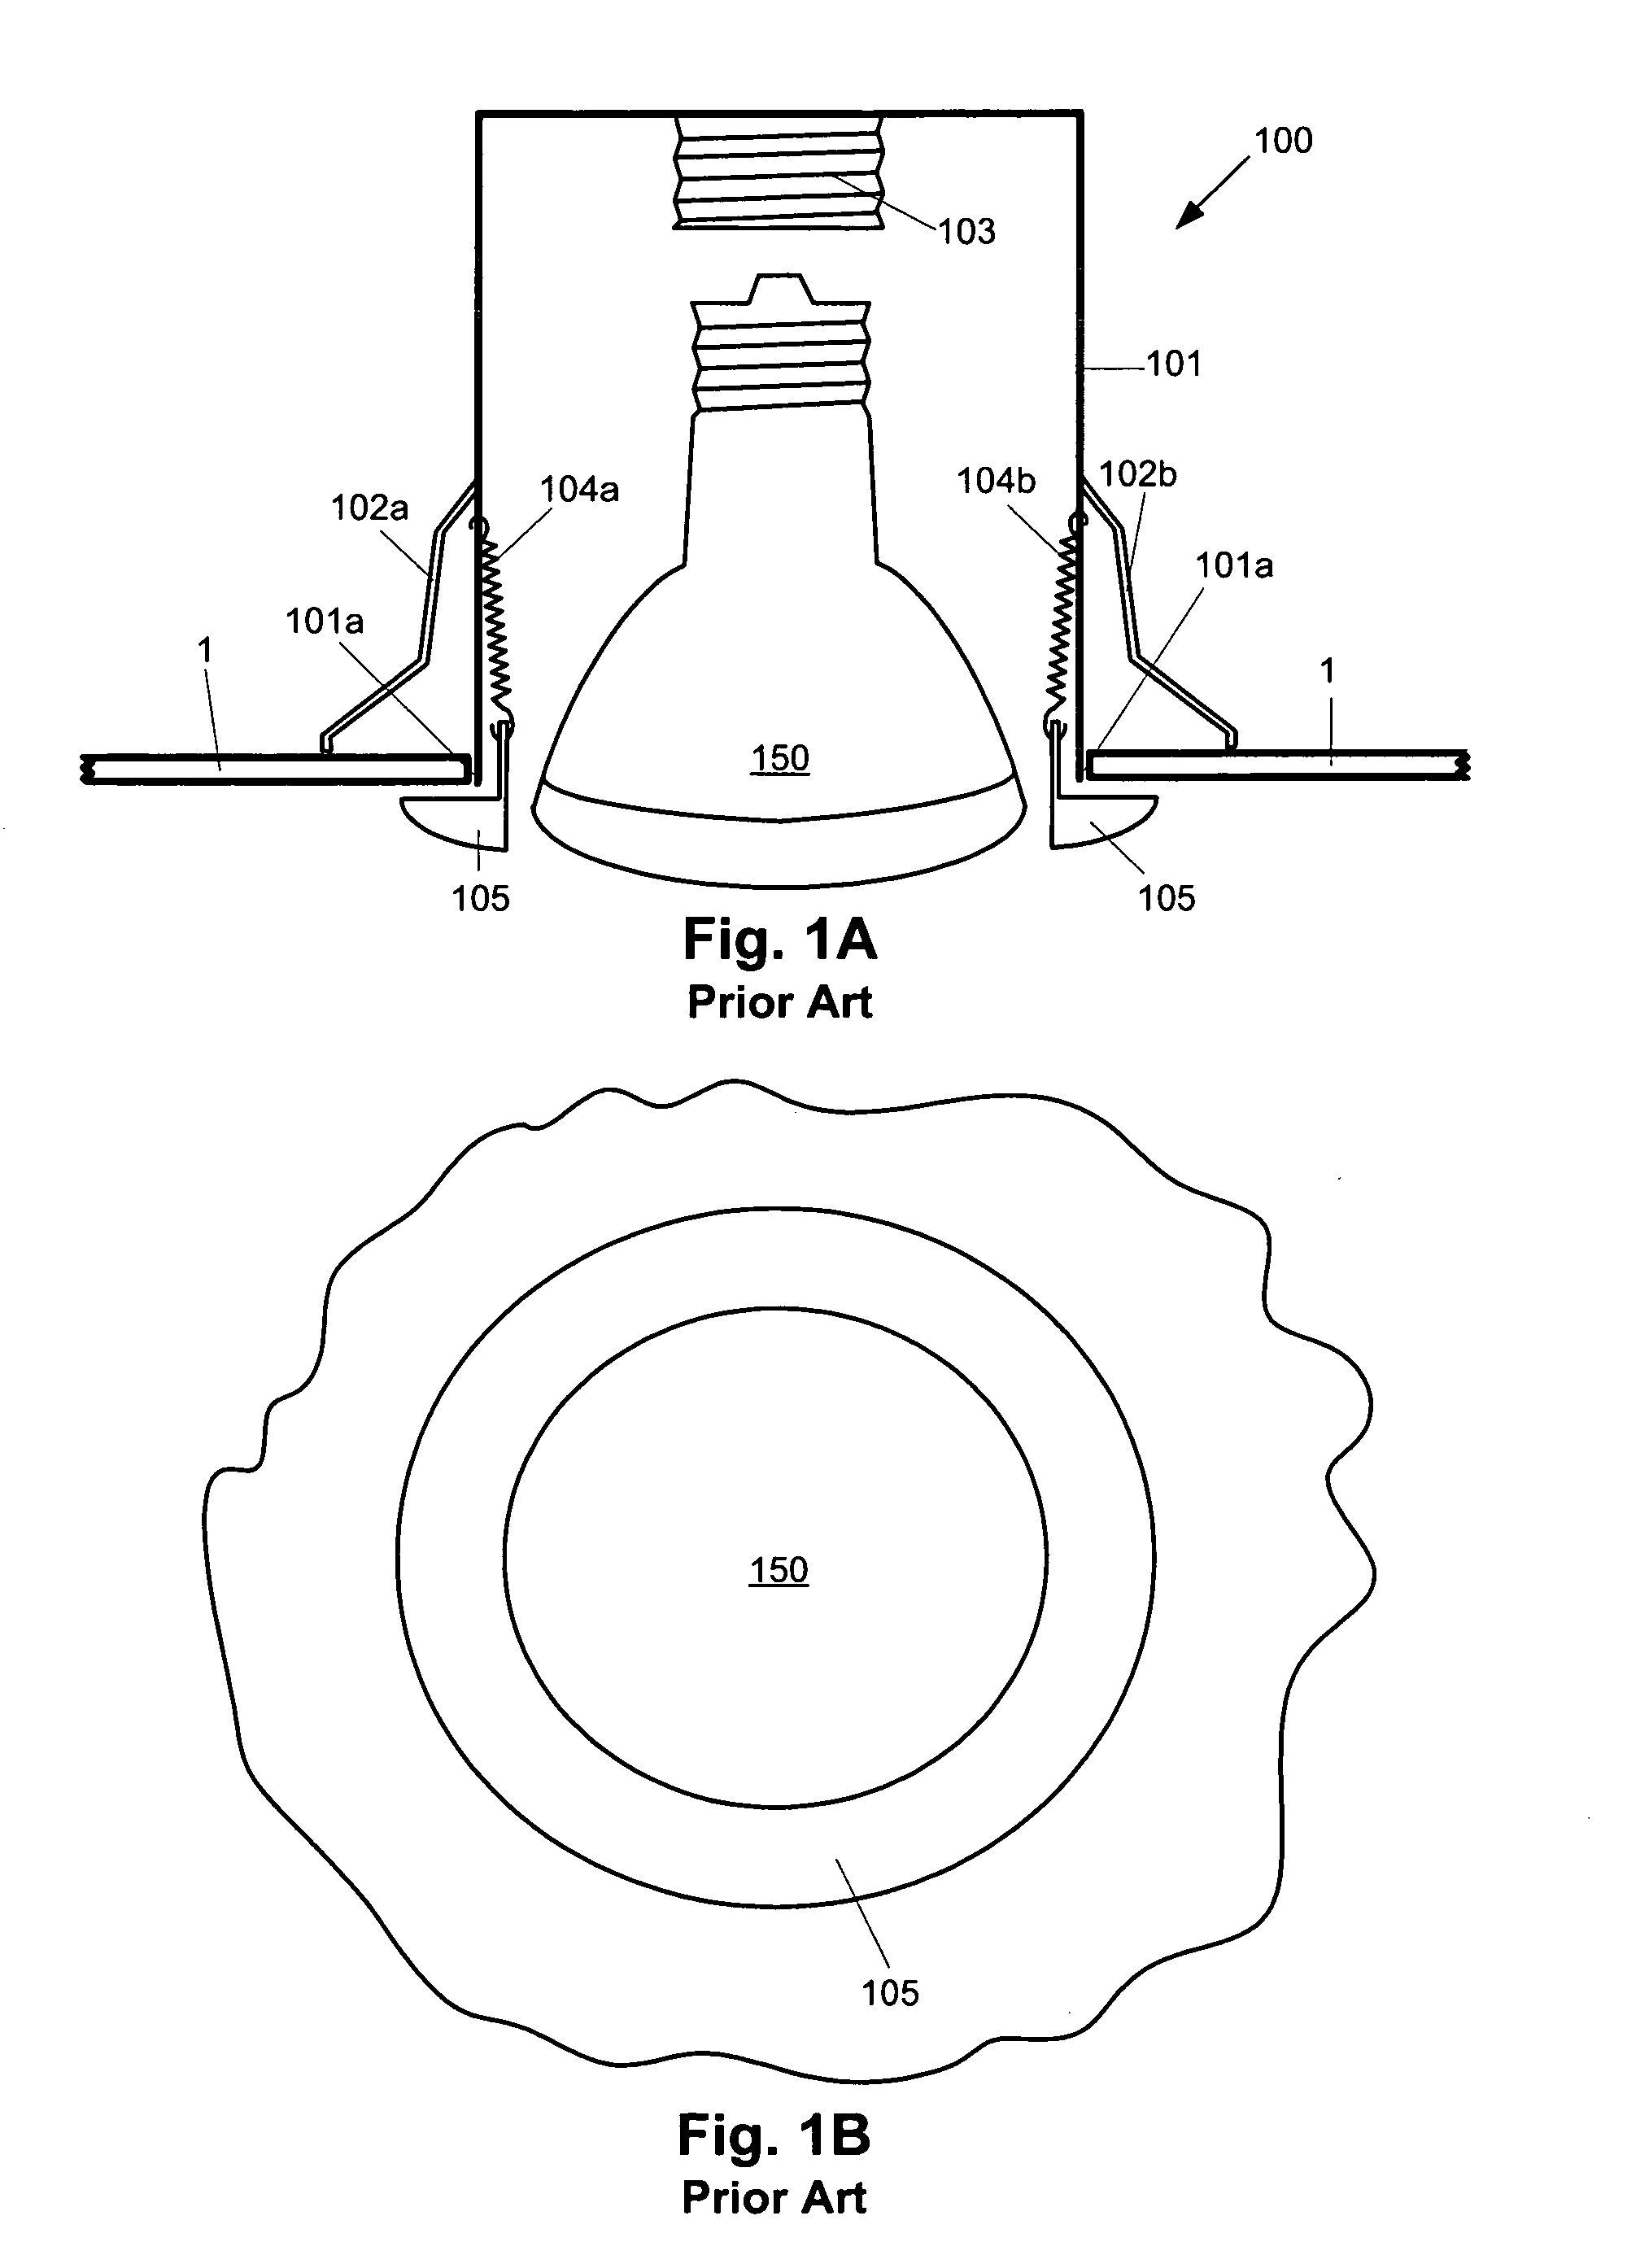 Lighting device for a recessed light fixture